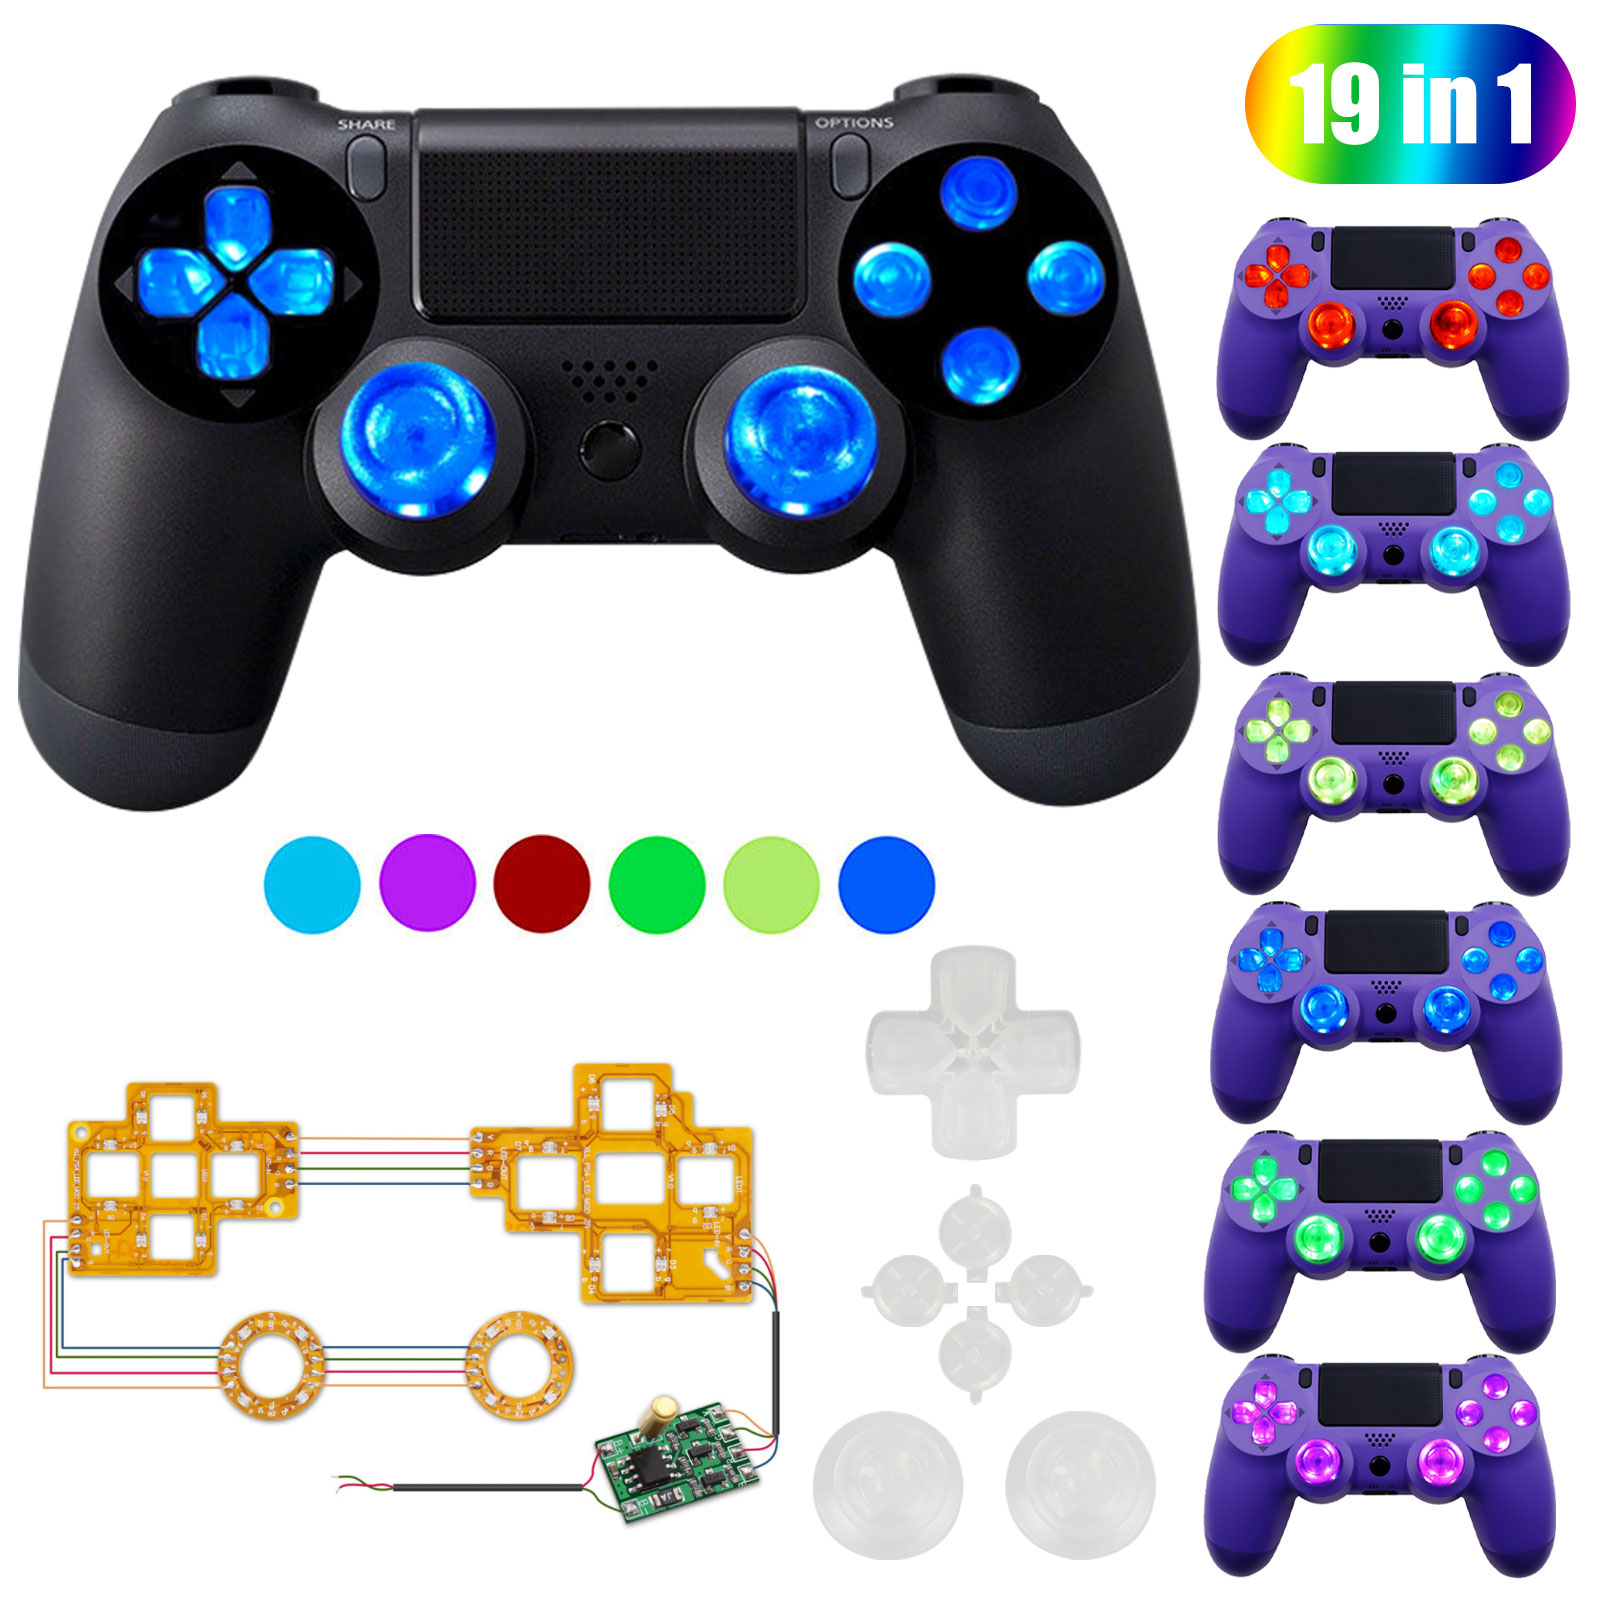 7 Color Led Flash Light Thumbsticks Mod Abxy Button For Ps4 Slim Pro Controller Ebay